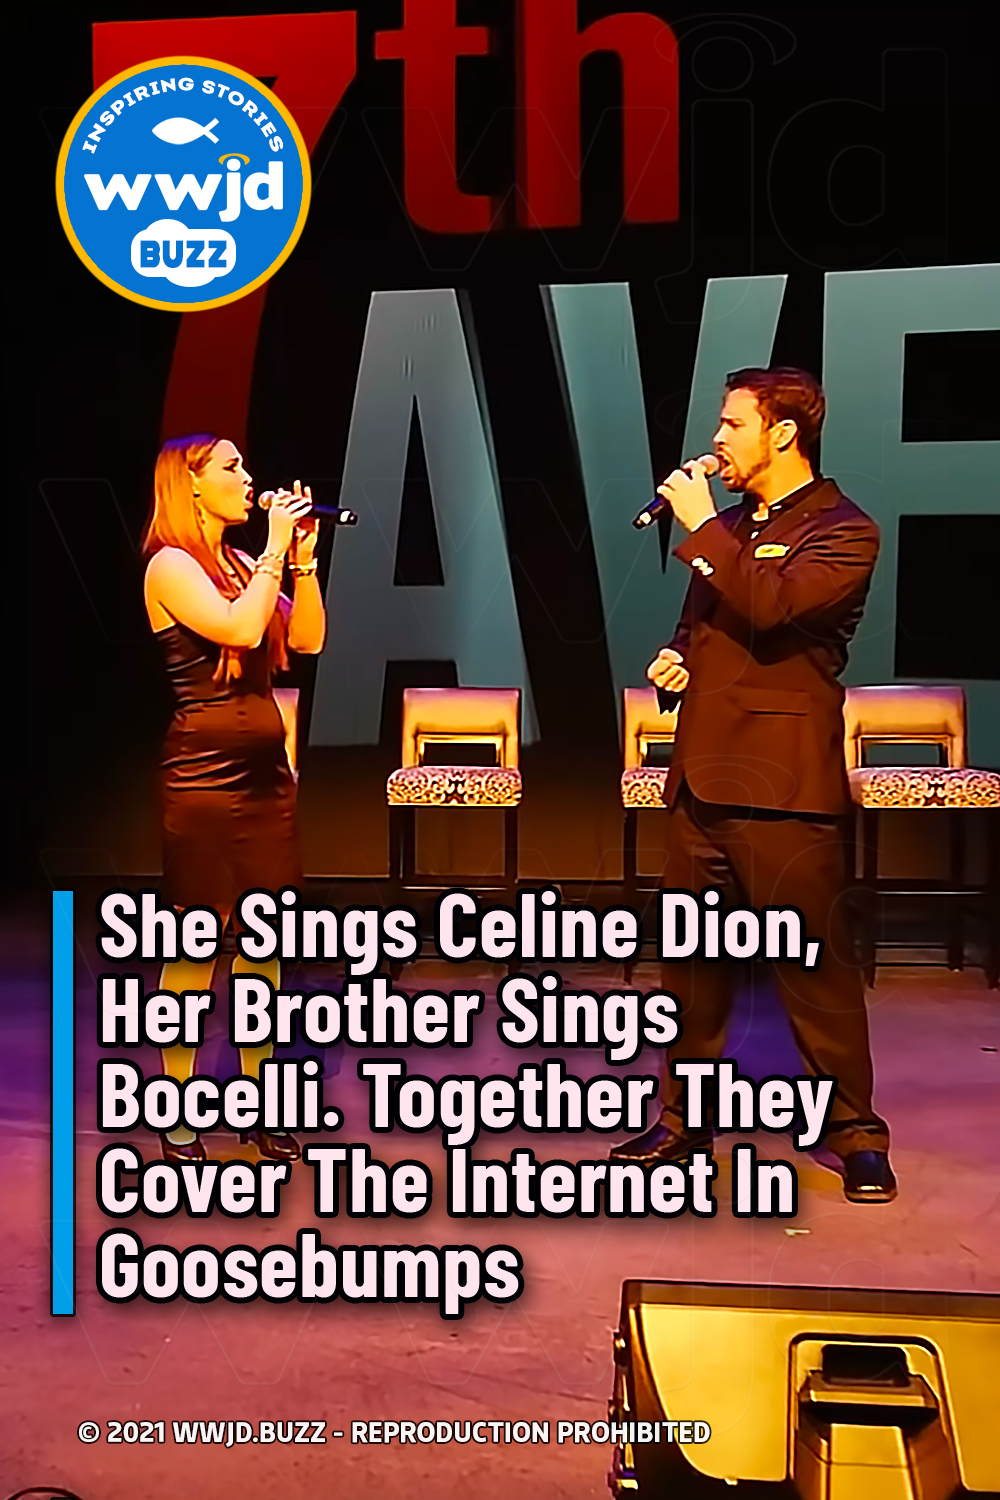 She Sings Celine Dion, Her Brother Sings Bocelli. Together They Cover The Internet In Goosebumps